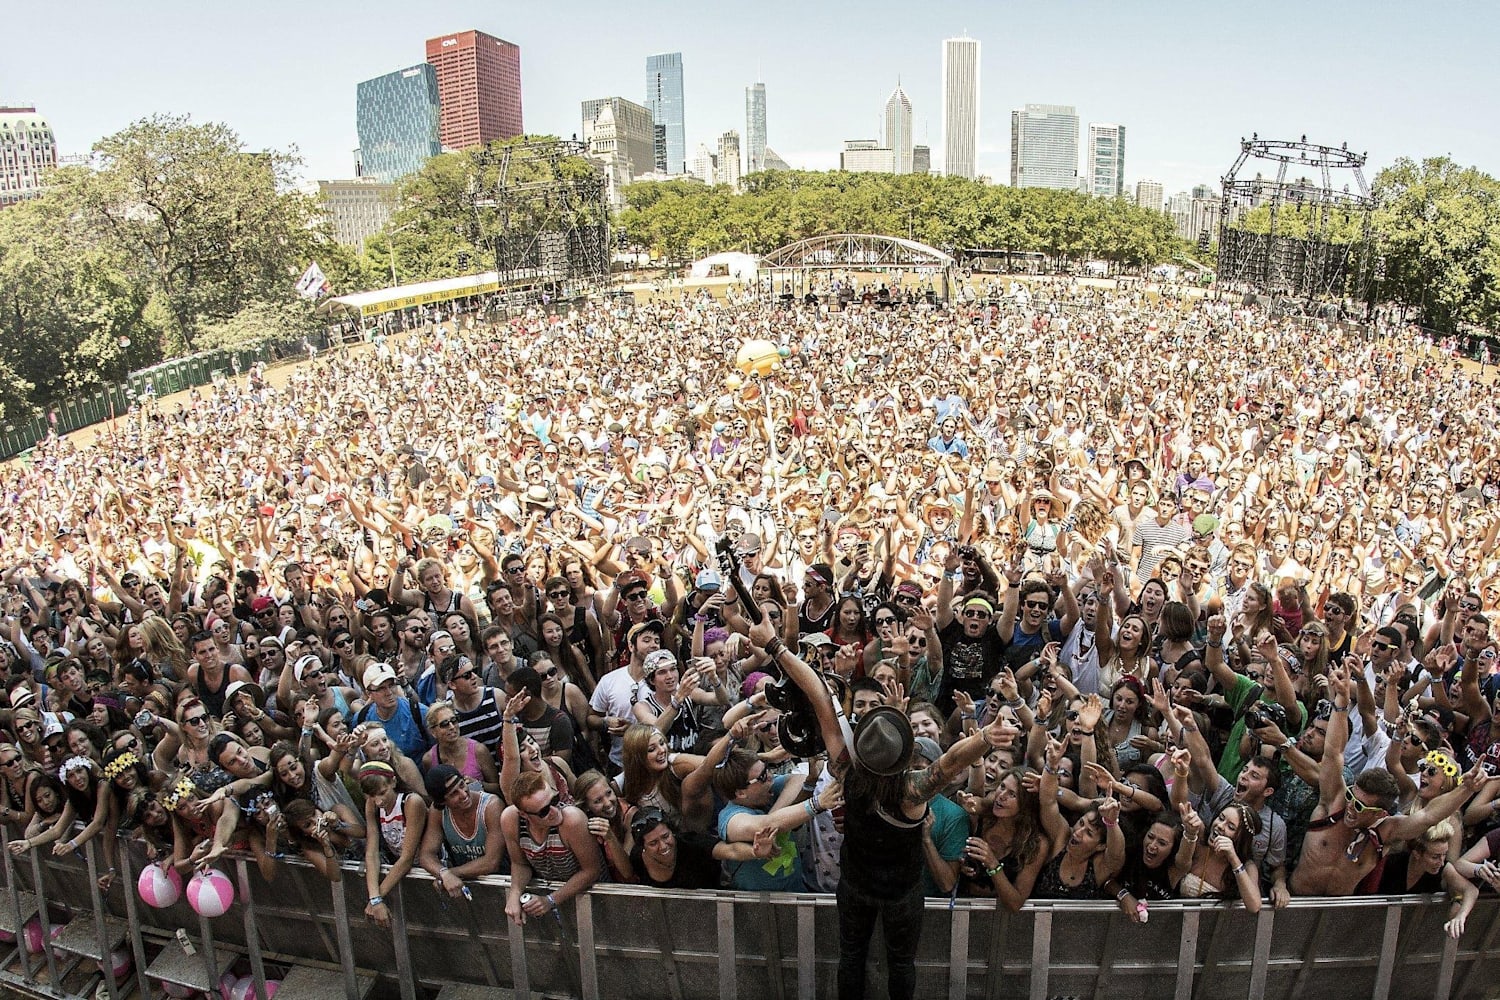 The most iconic moments in Lollapalooza history